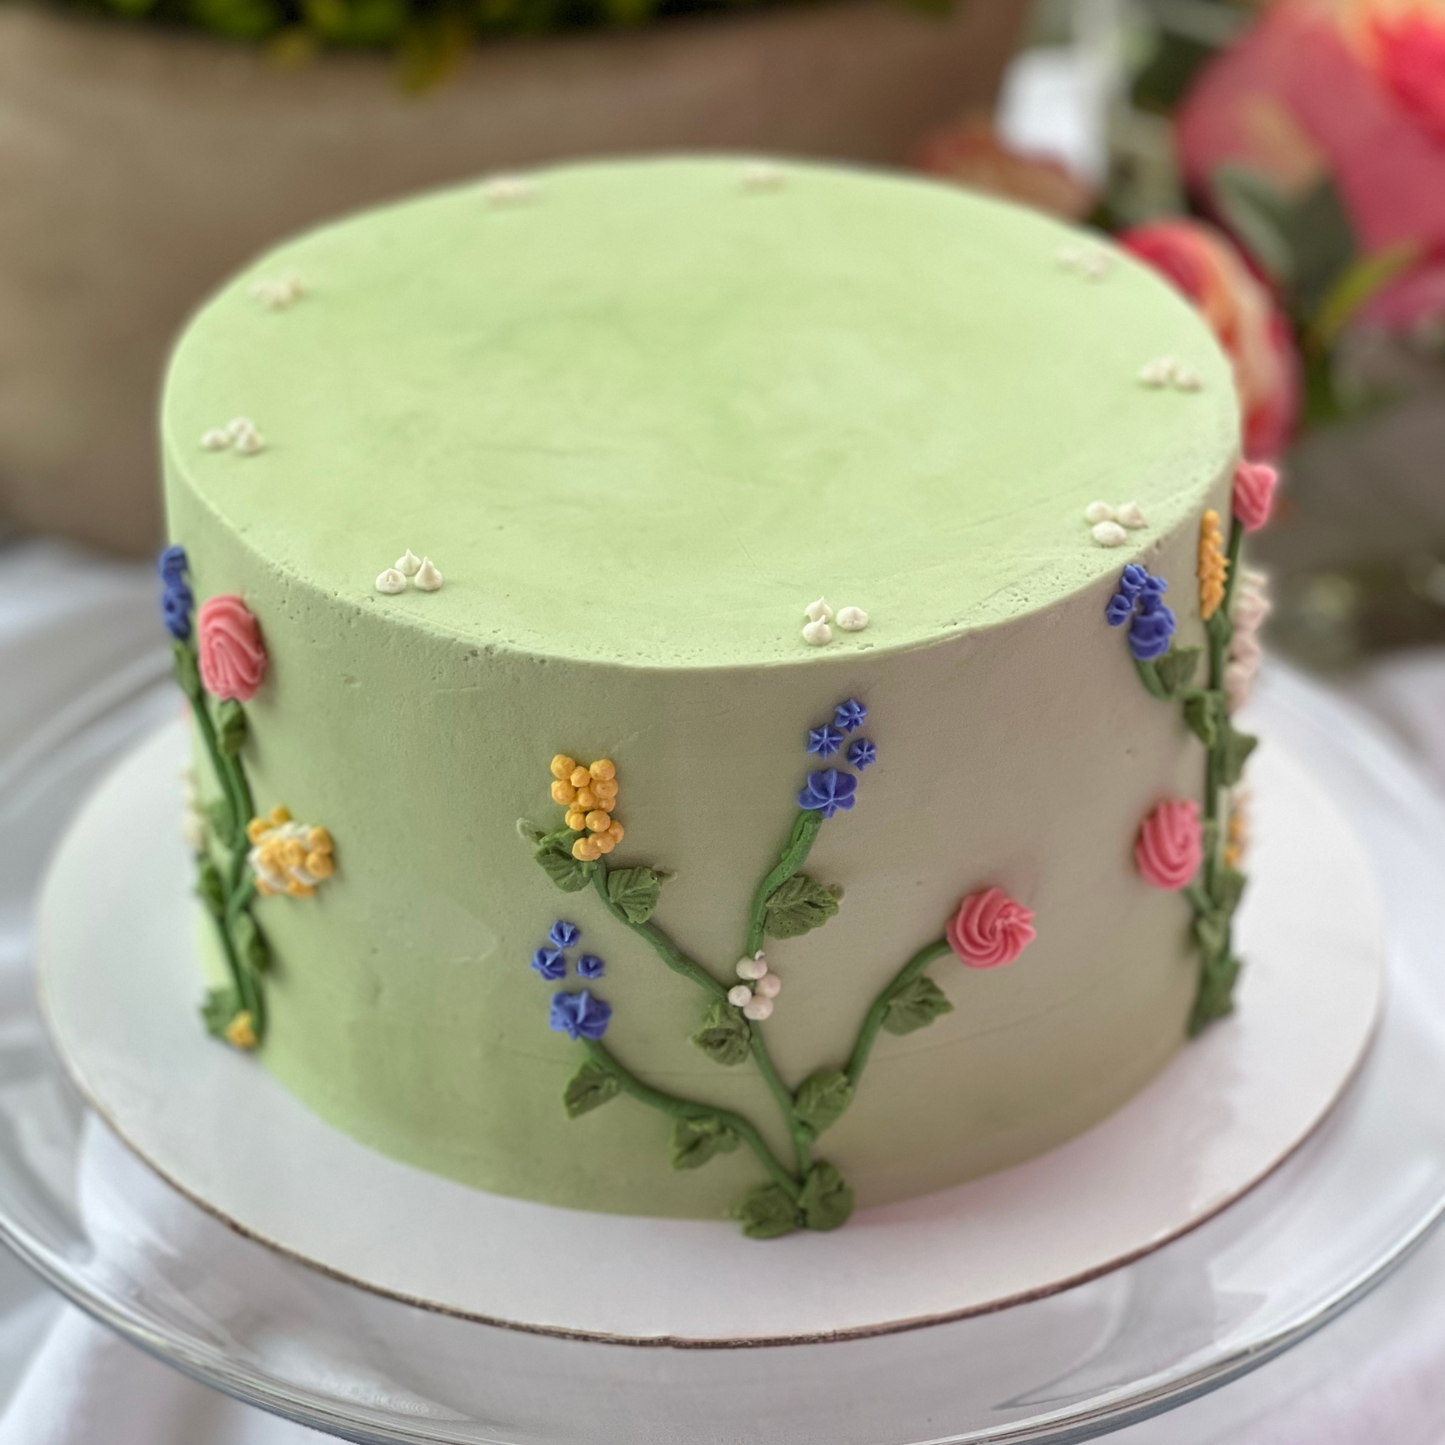 Bloom Decorated Cake